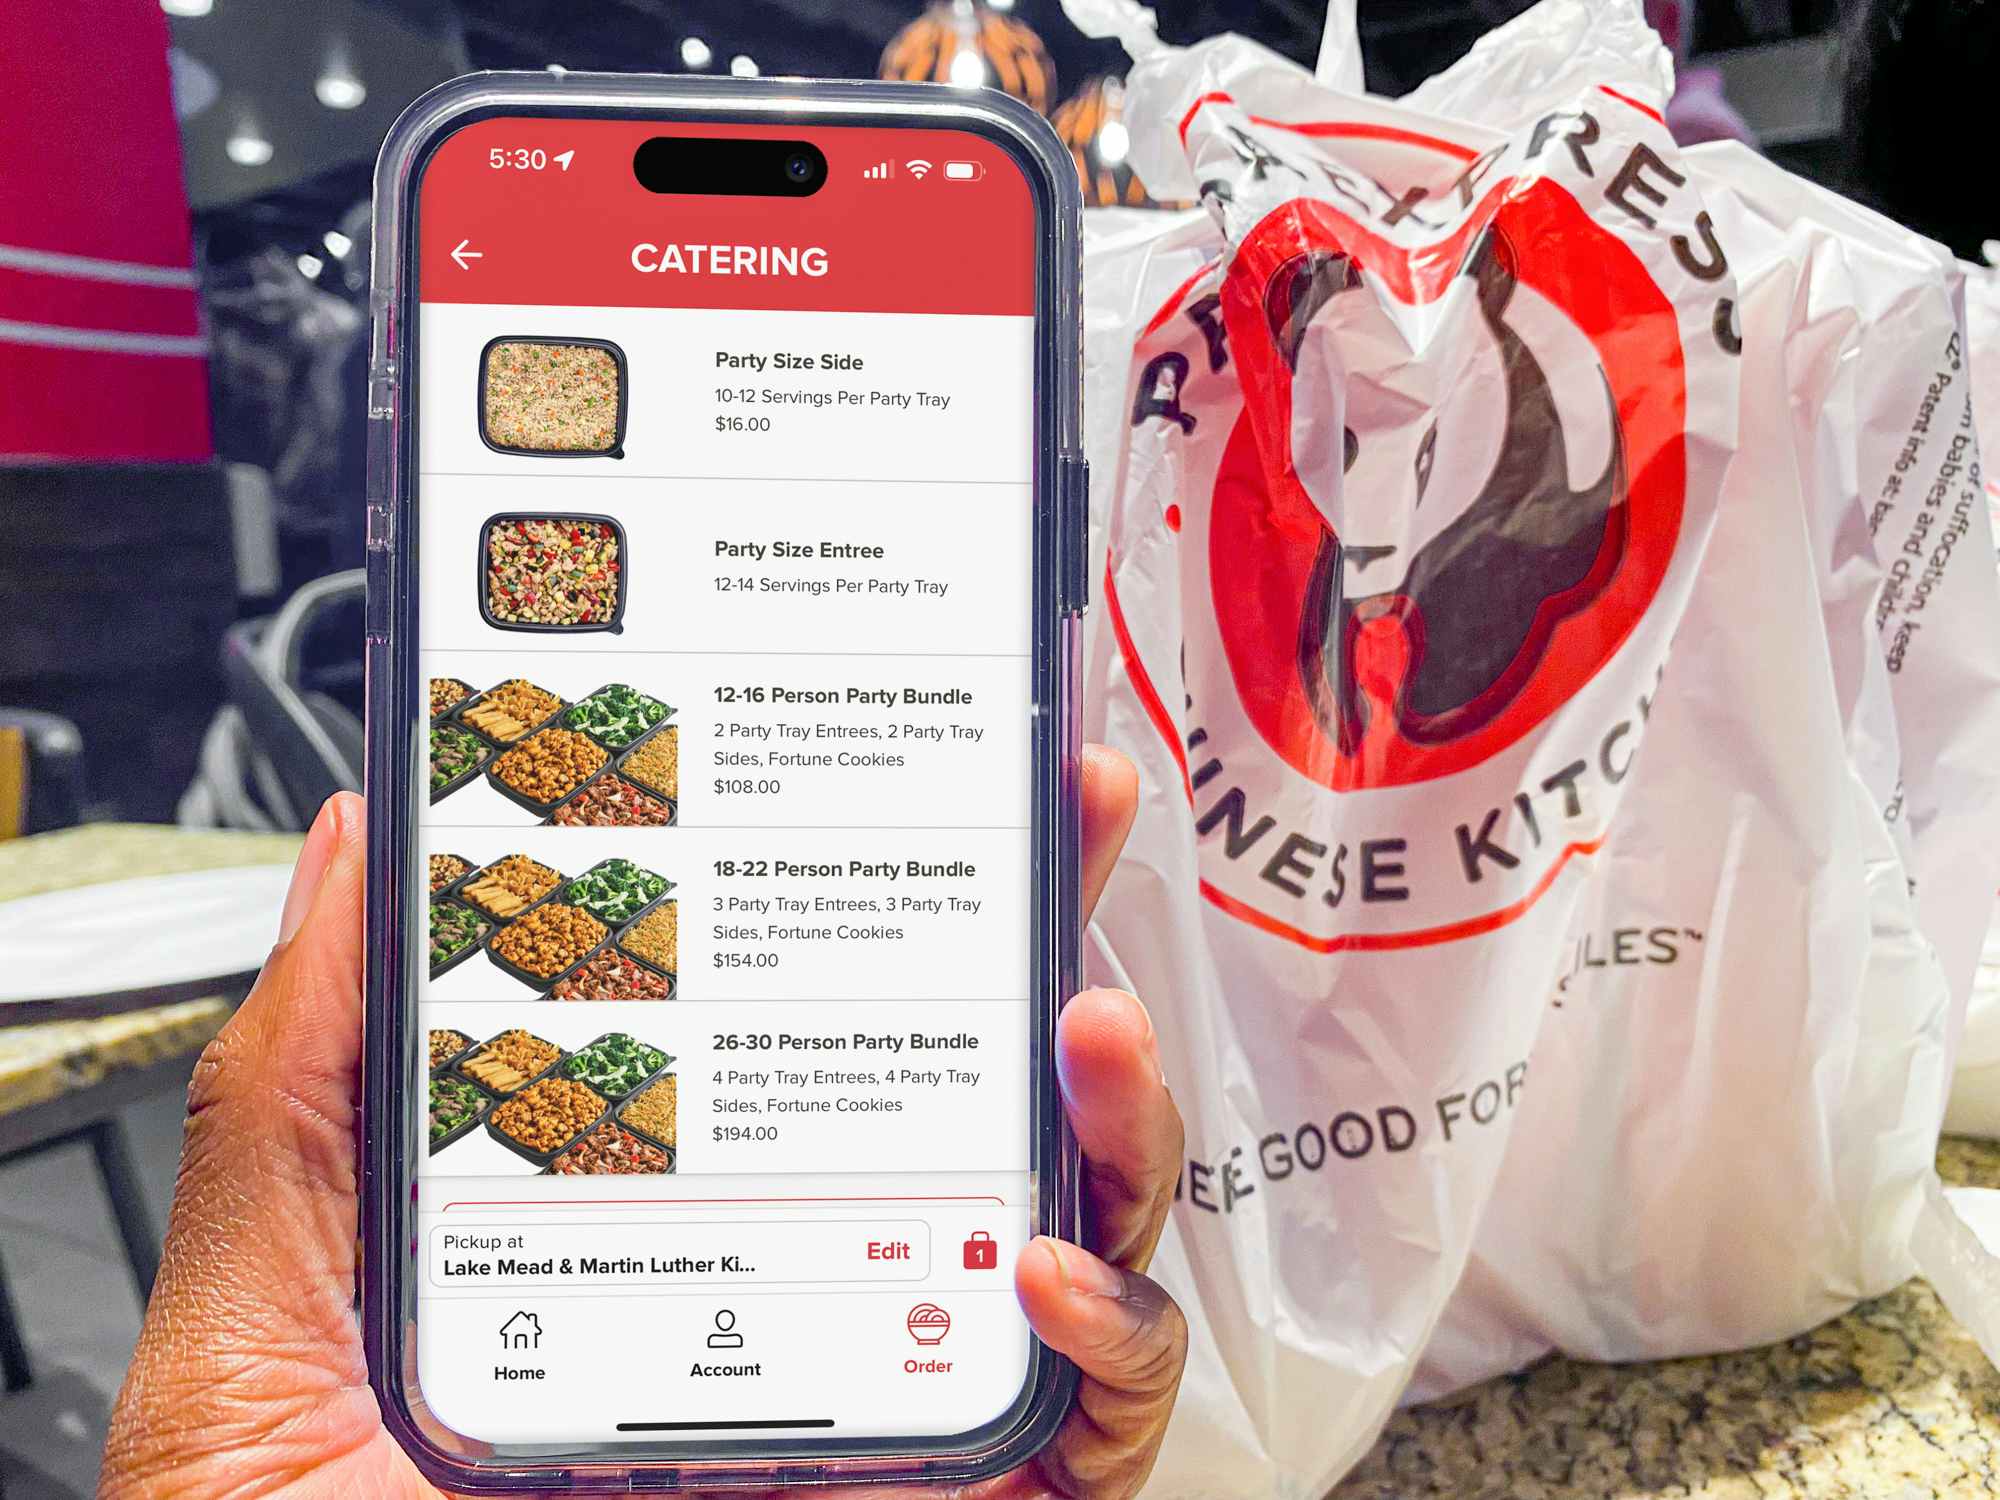 Someone holding a phone displaying the Panda Express app's page for catering